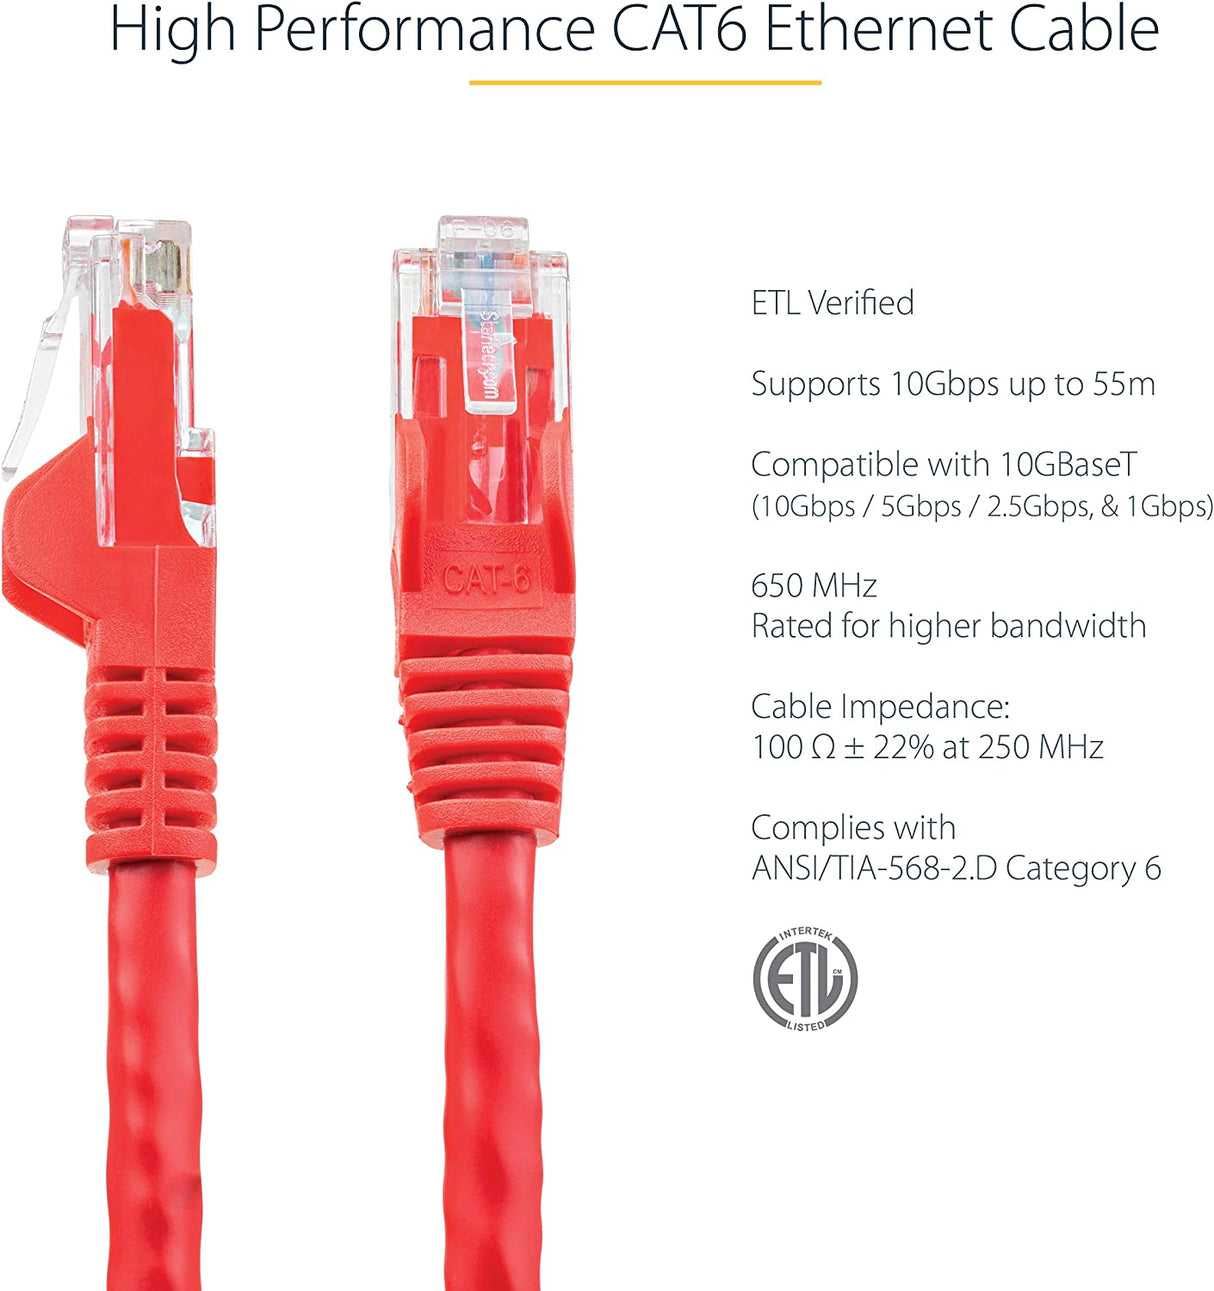 StarTech.com 75ft CAT6 Ethernet Cable - Red CAT 6 Gigabit Ethernet Wire -650MHz 100W PoE RJ45 UTP Category 6 Network/Patch Cord Snagless w/Strain Relief Fluke Tested UL/TIA Certified (N6PATCH75RD) Red 75 ft / 22.8 m 1 Pack